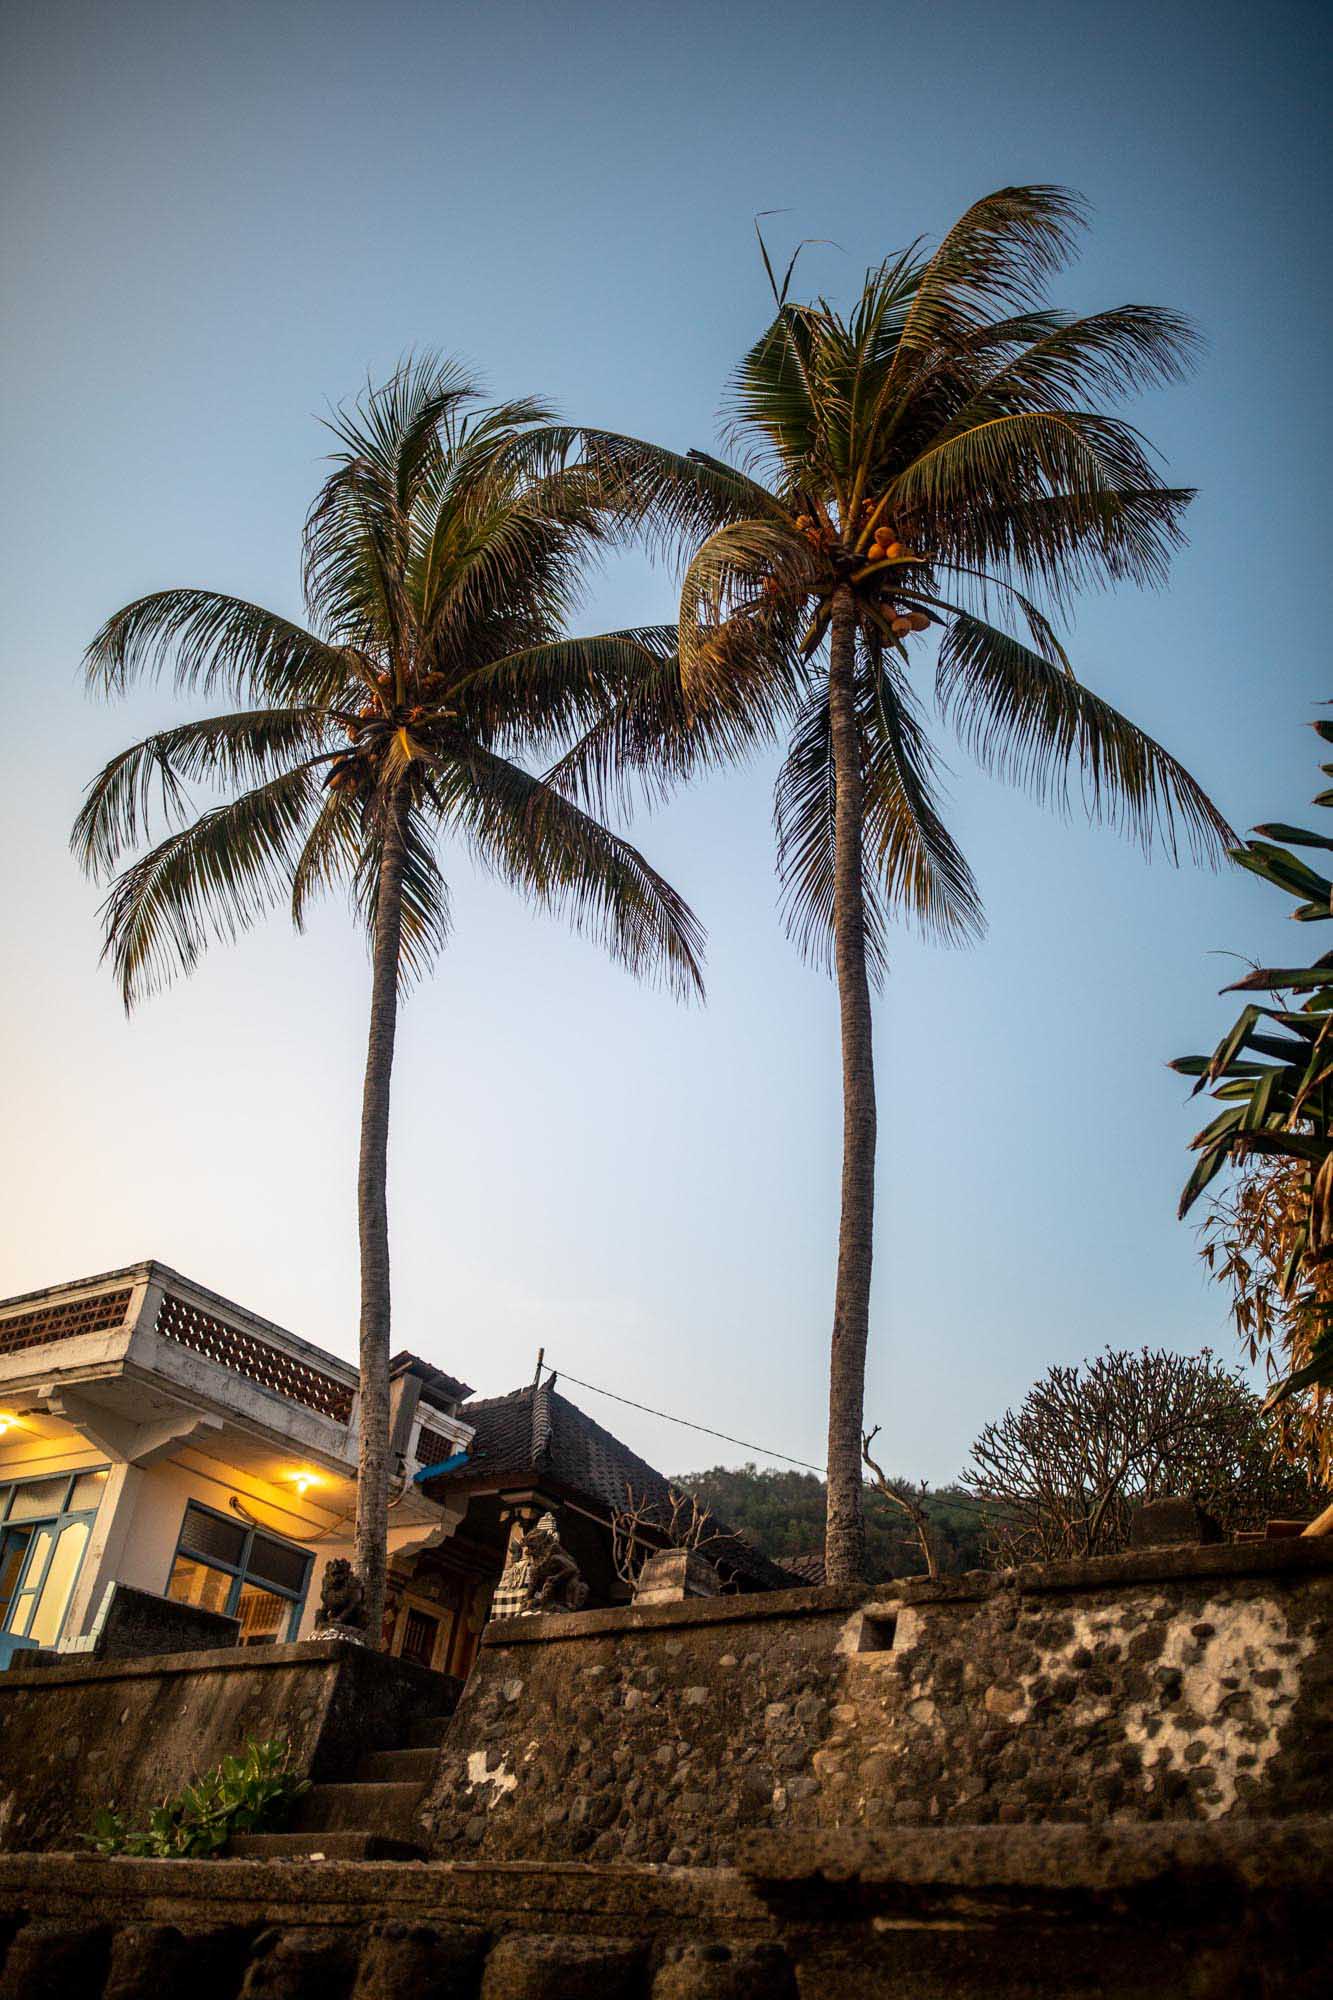 Two palm trees near beach in Candidasa, Bali, Indonesia